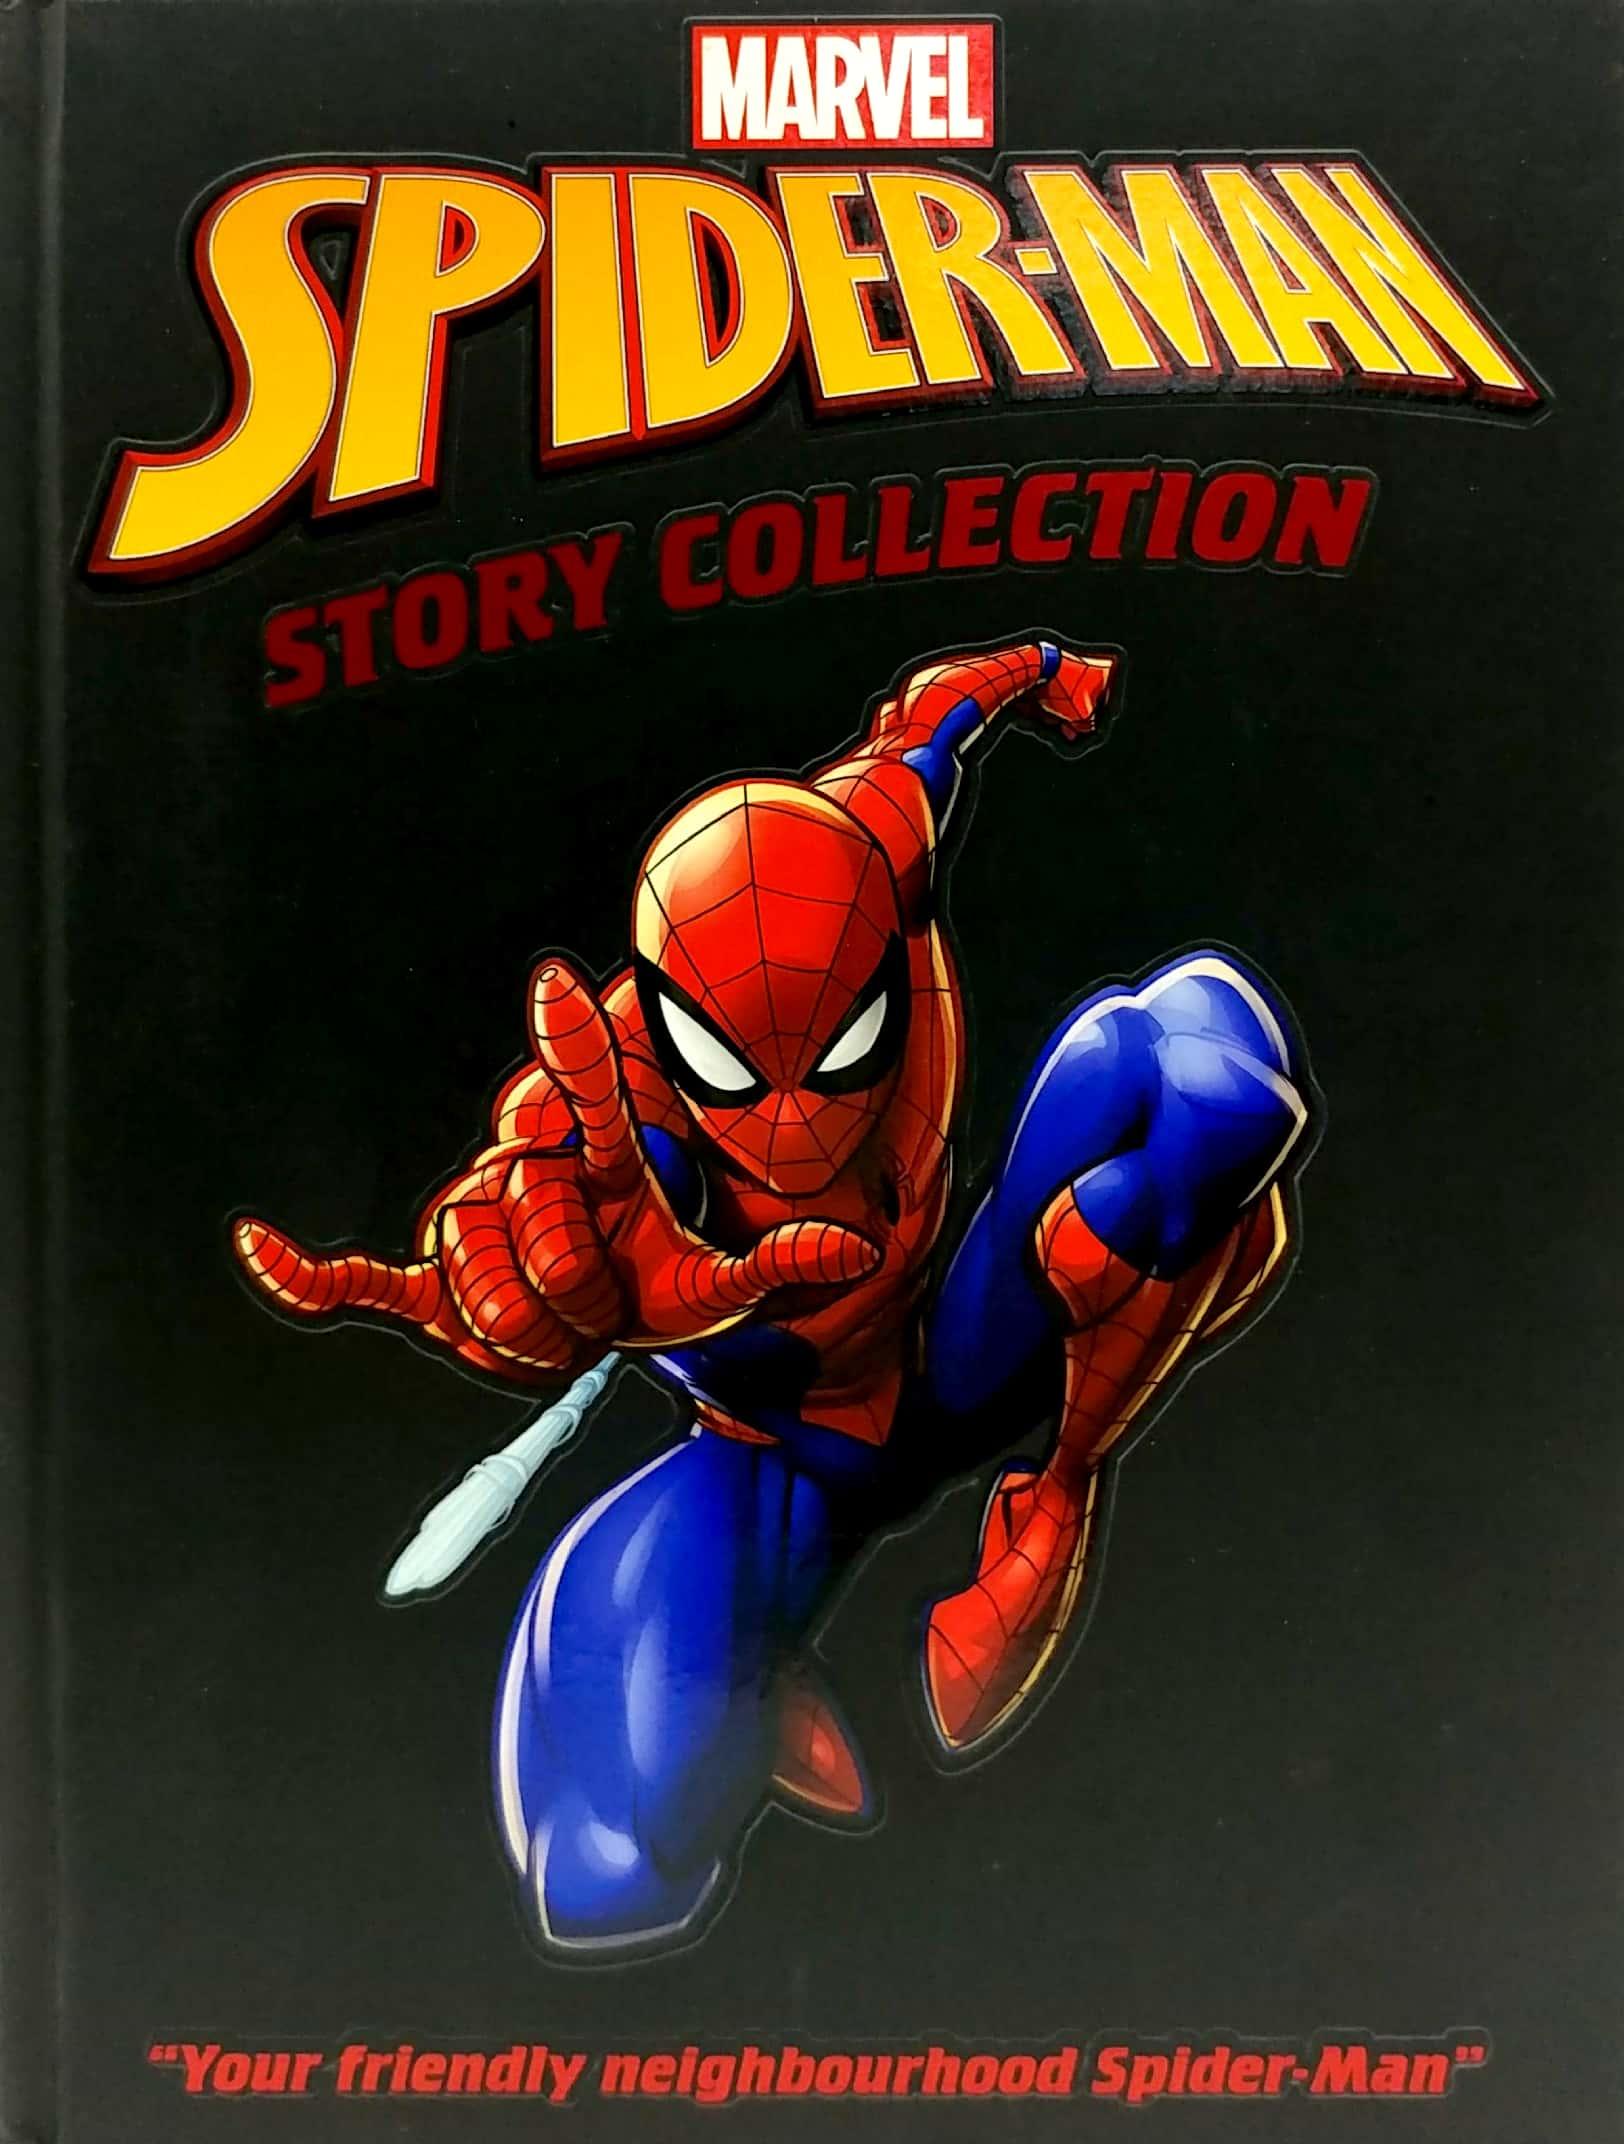 Marvel Spider-Man Story Collection (Deluxe Treasury 196 Marvel)